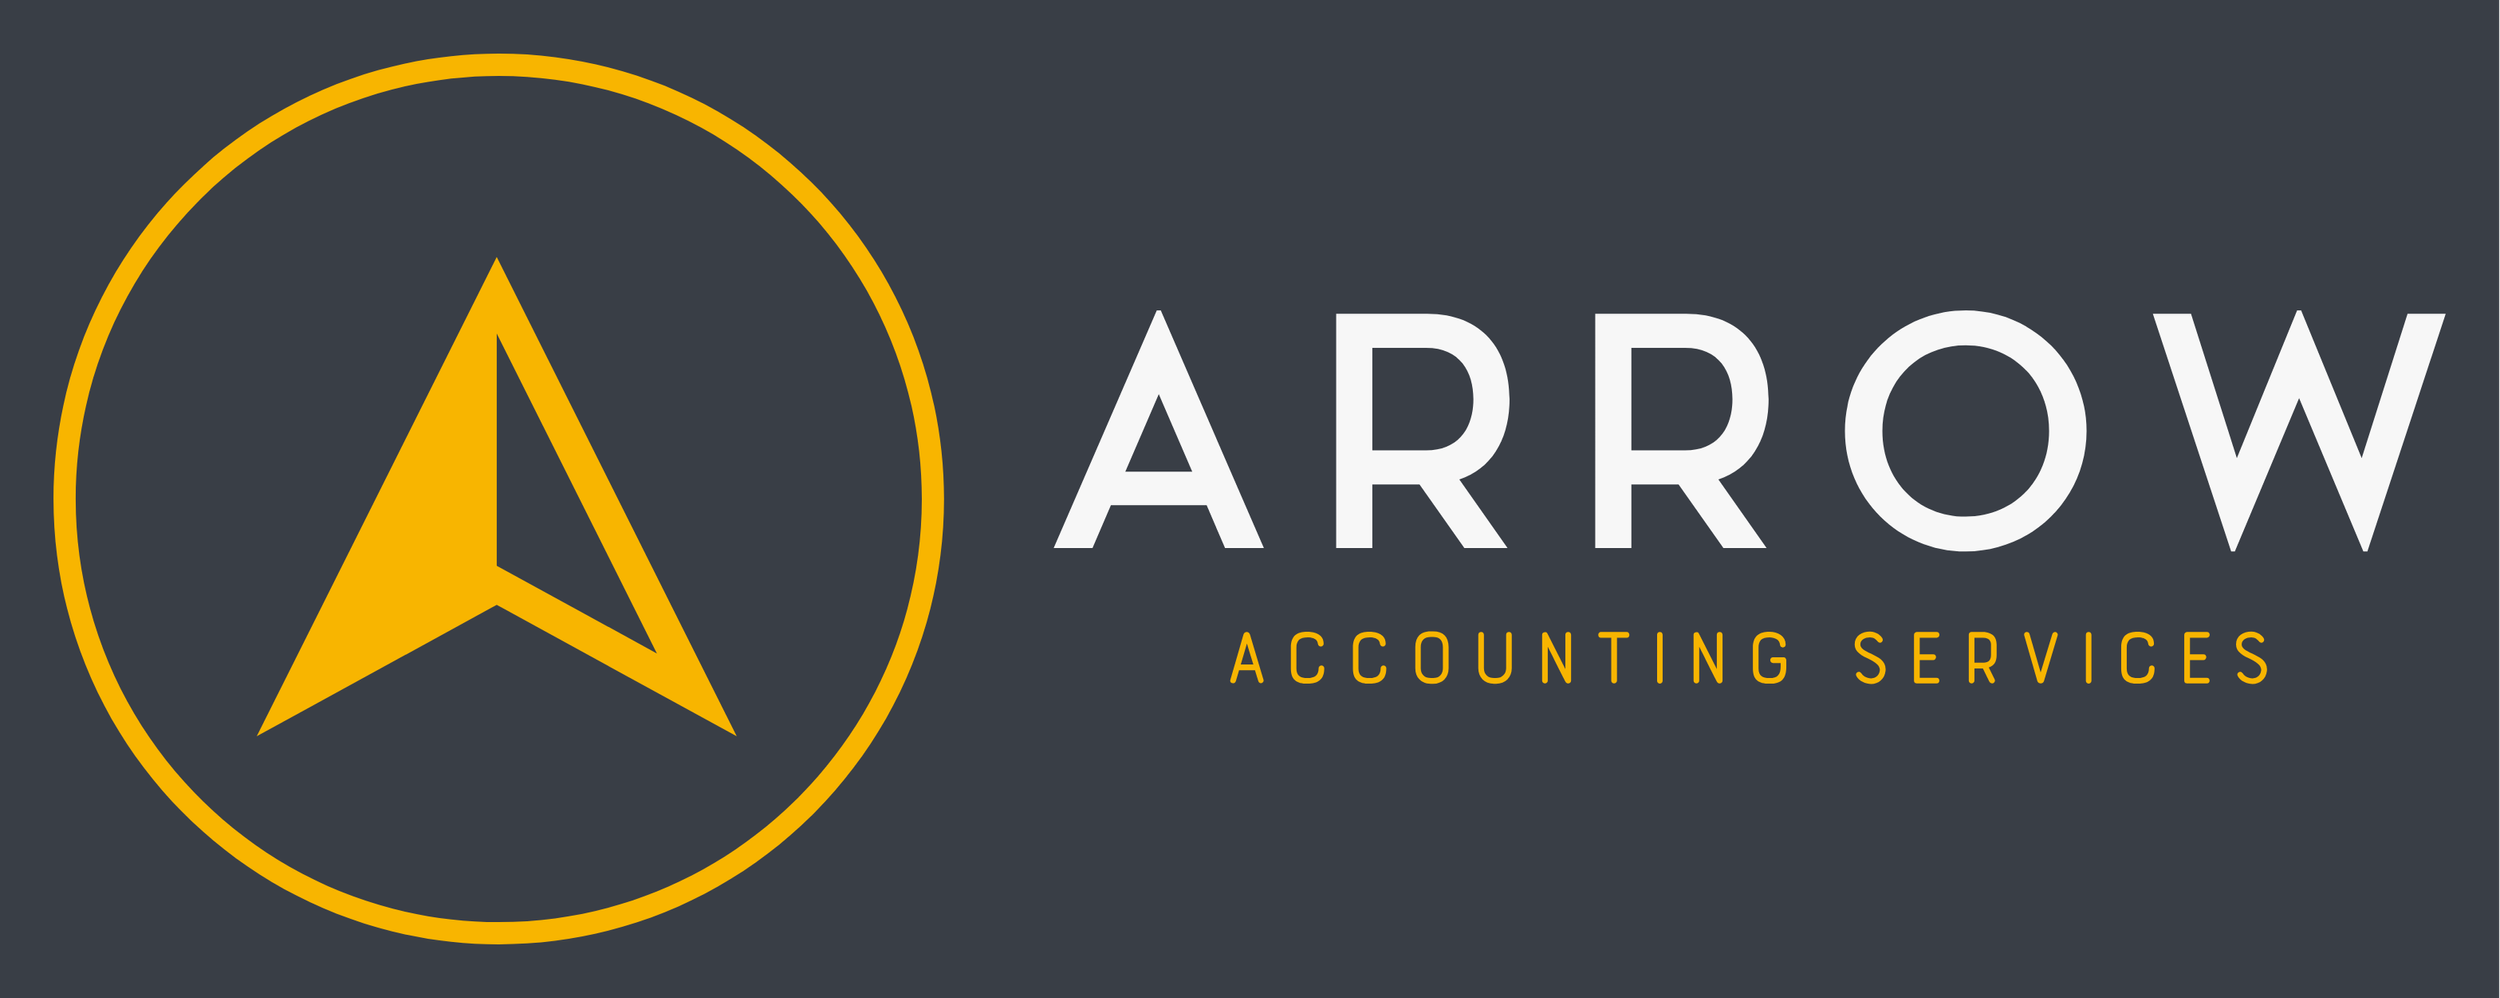 Arrow Accounting Services 